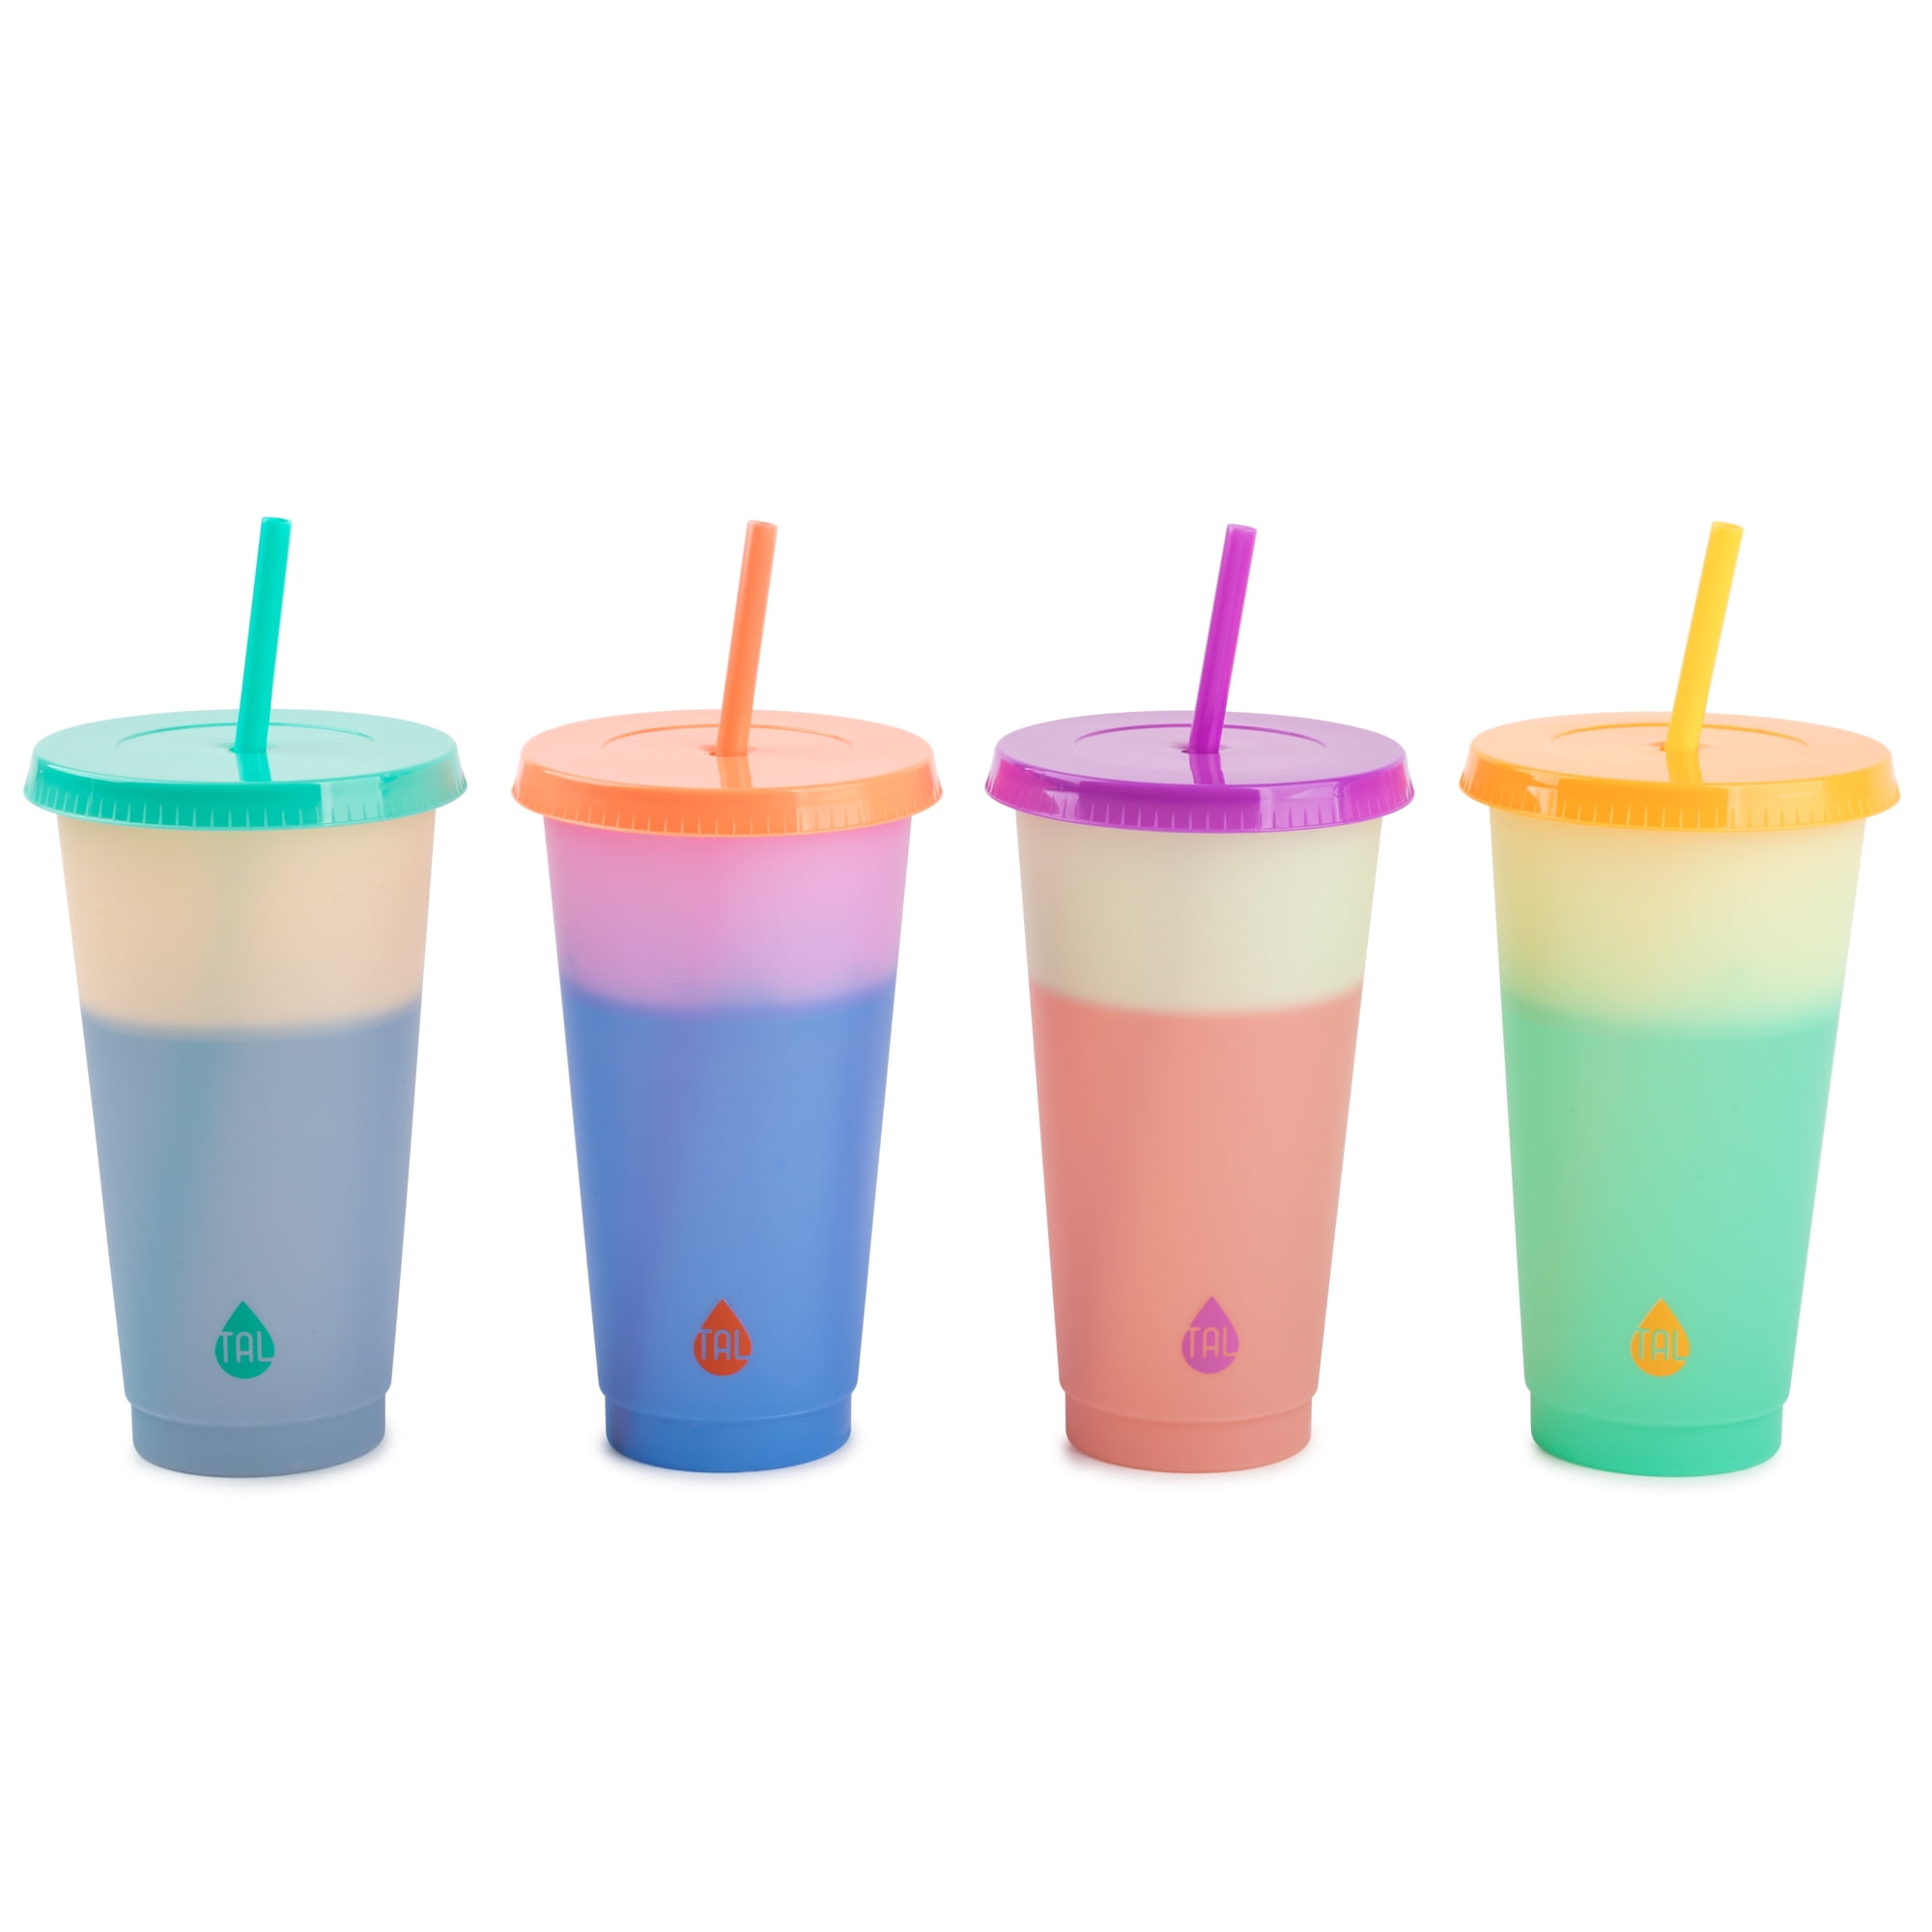 TAL Silicone Color Changing Straws, 5 Pack 